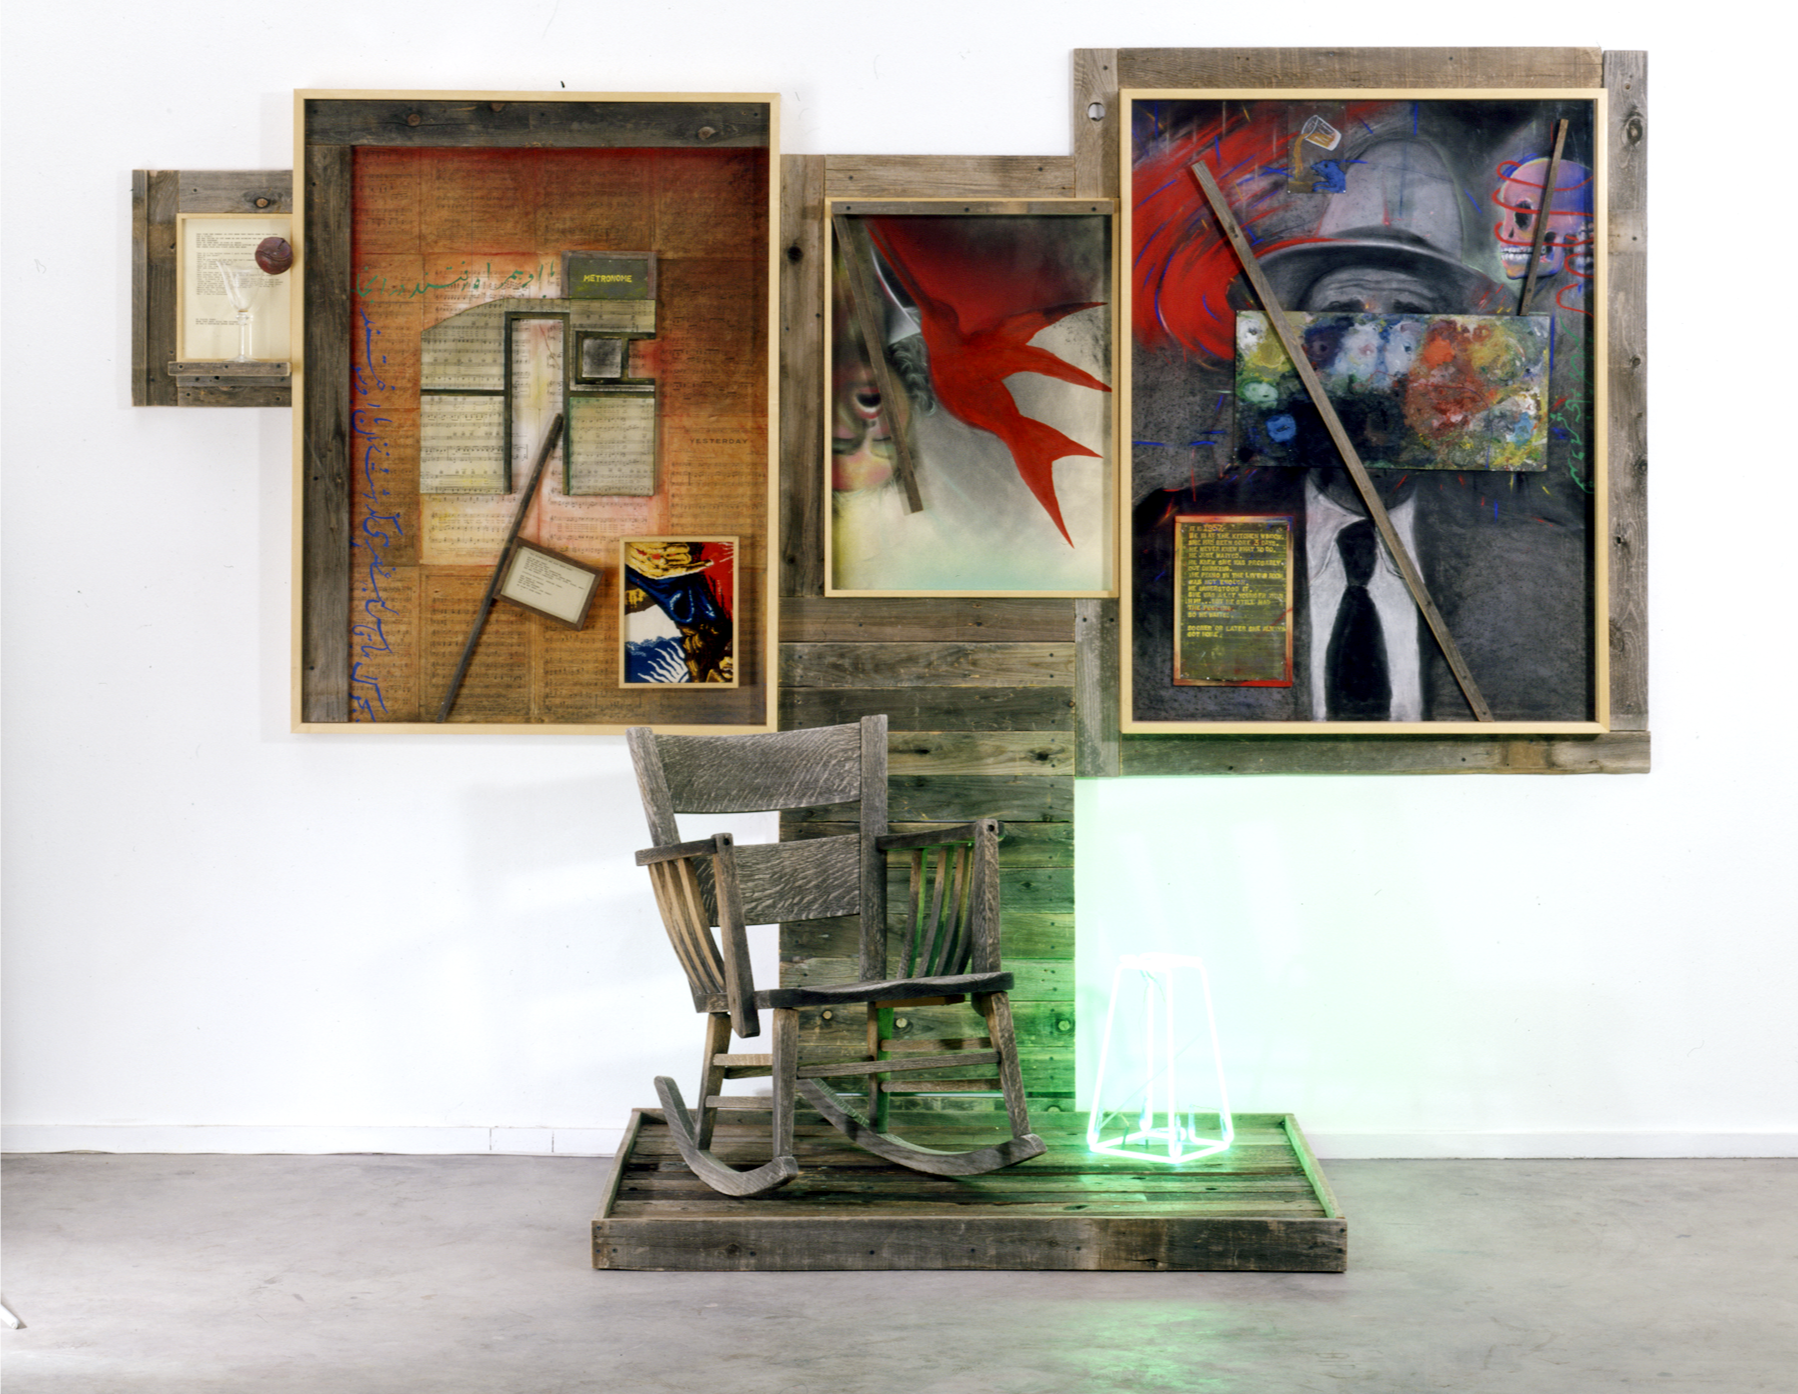   Terry Allen ,   Metronome ("Dugout" Stage III) , 2001,  mixed media assemblage, 85 x 115 1/4 x 39 1/2 in. 